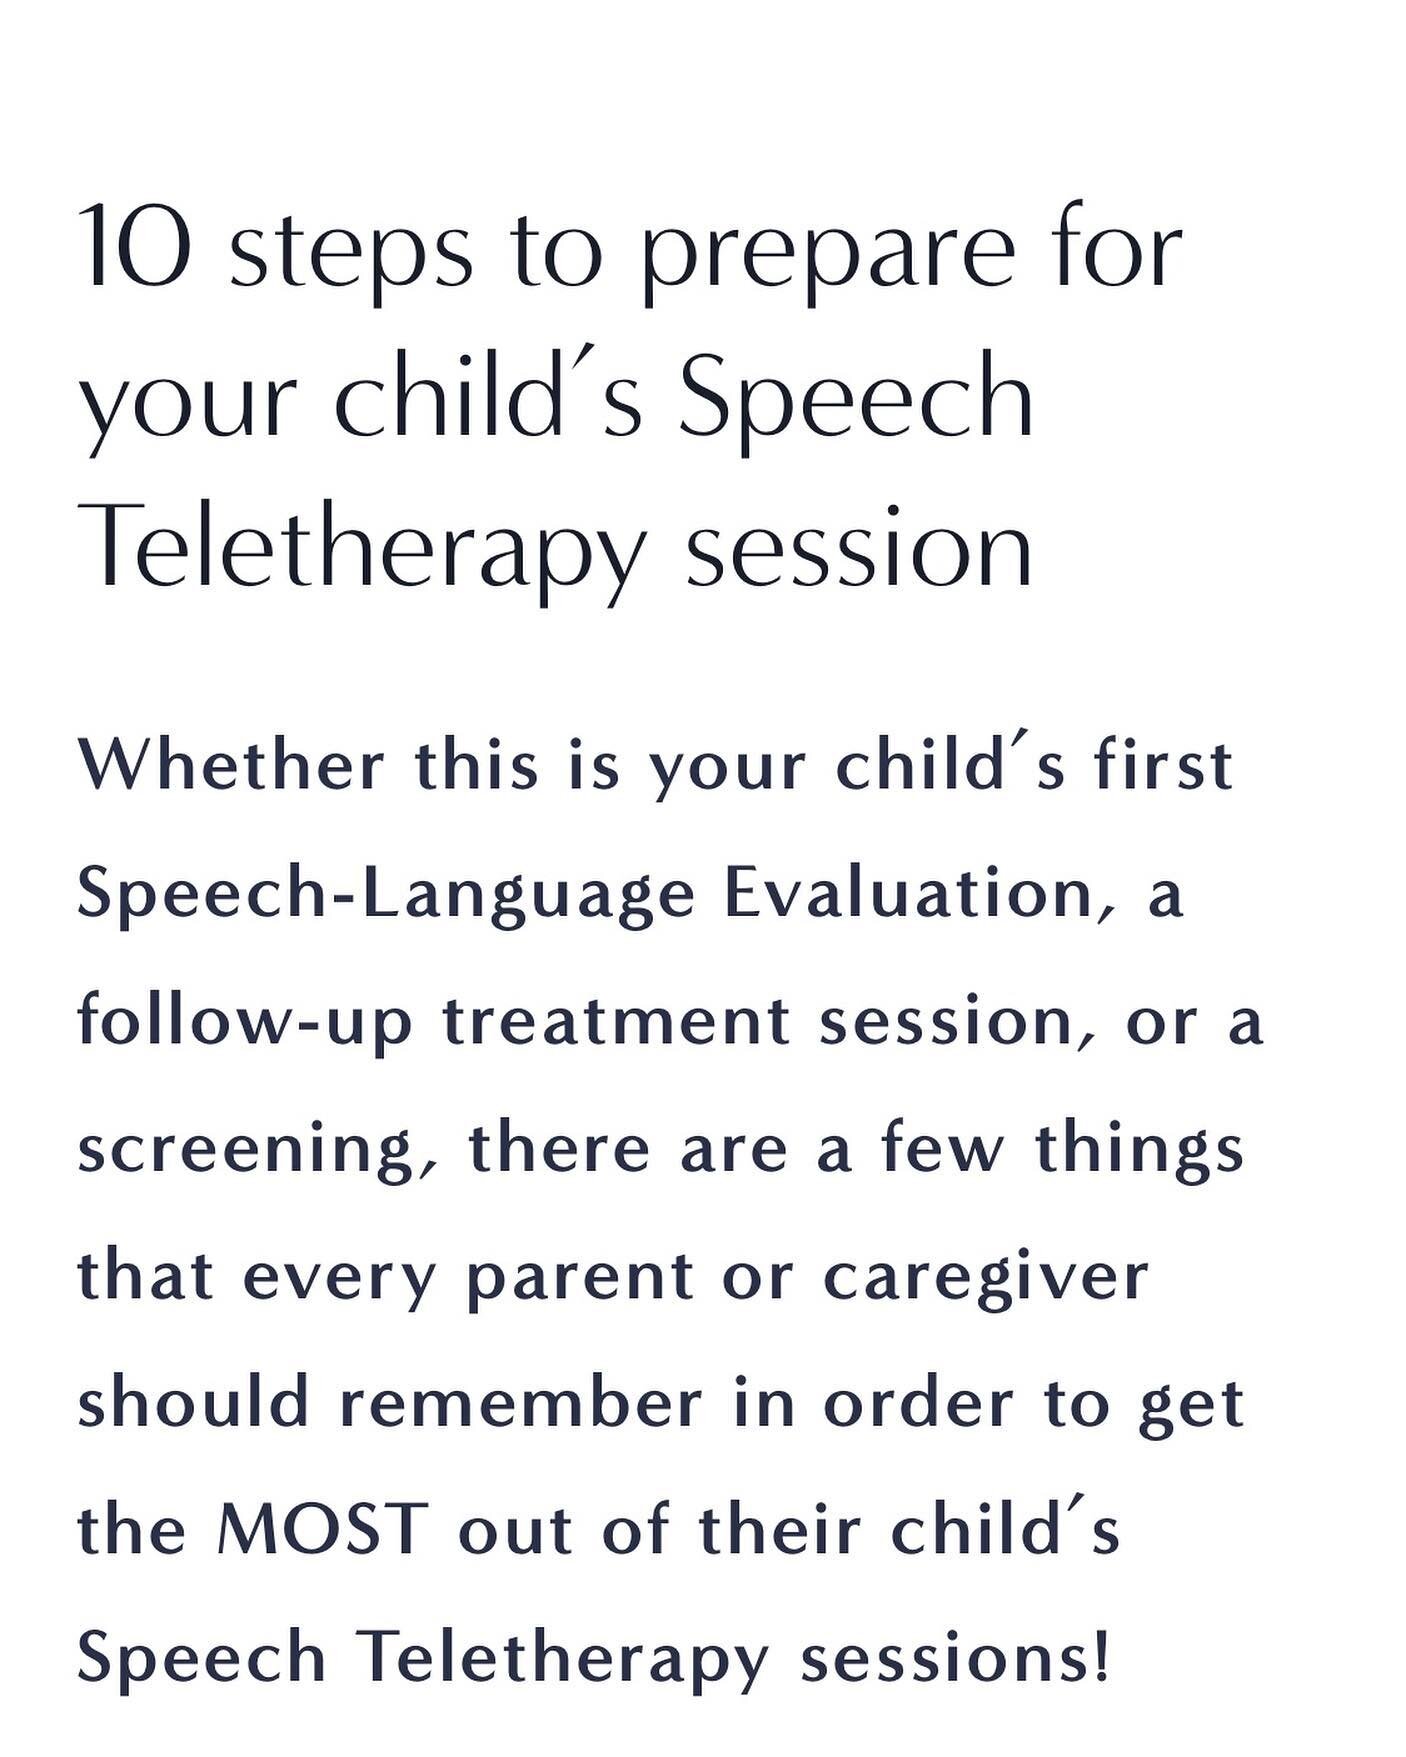 If you&rsquo;re a telepractice provider or client, then you know how important it is to have completed these basic preparatory tasks for your telehealth sessions! This blog gives a quick list for reference. 🔗Link in bio!

#speechtherapy #speechthera